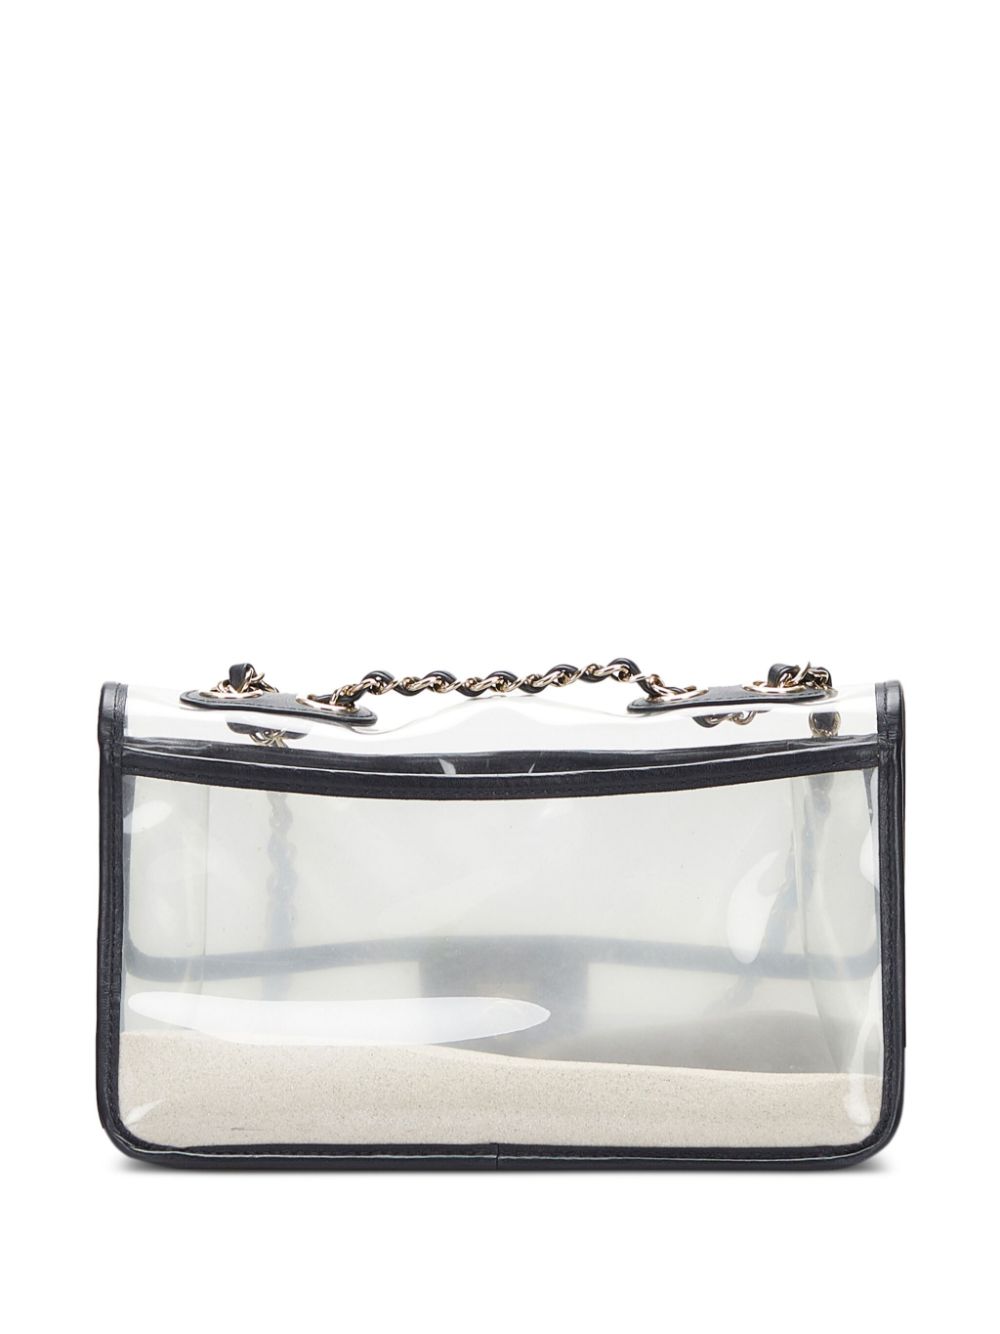 CHANEL Pre-Owned Sand By The Sea Flap Shoulder Bag - Farfetch